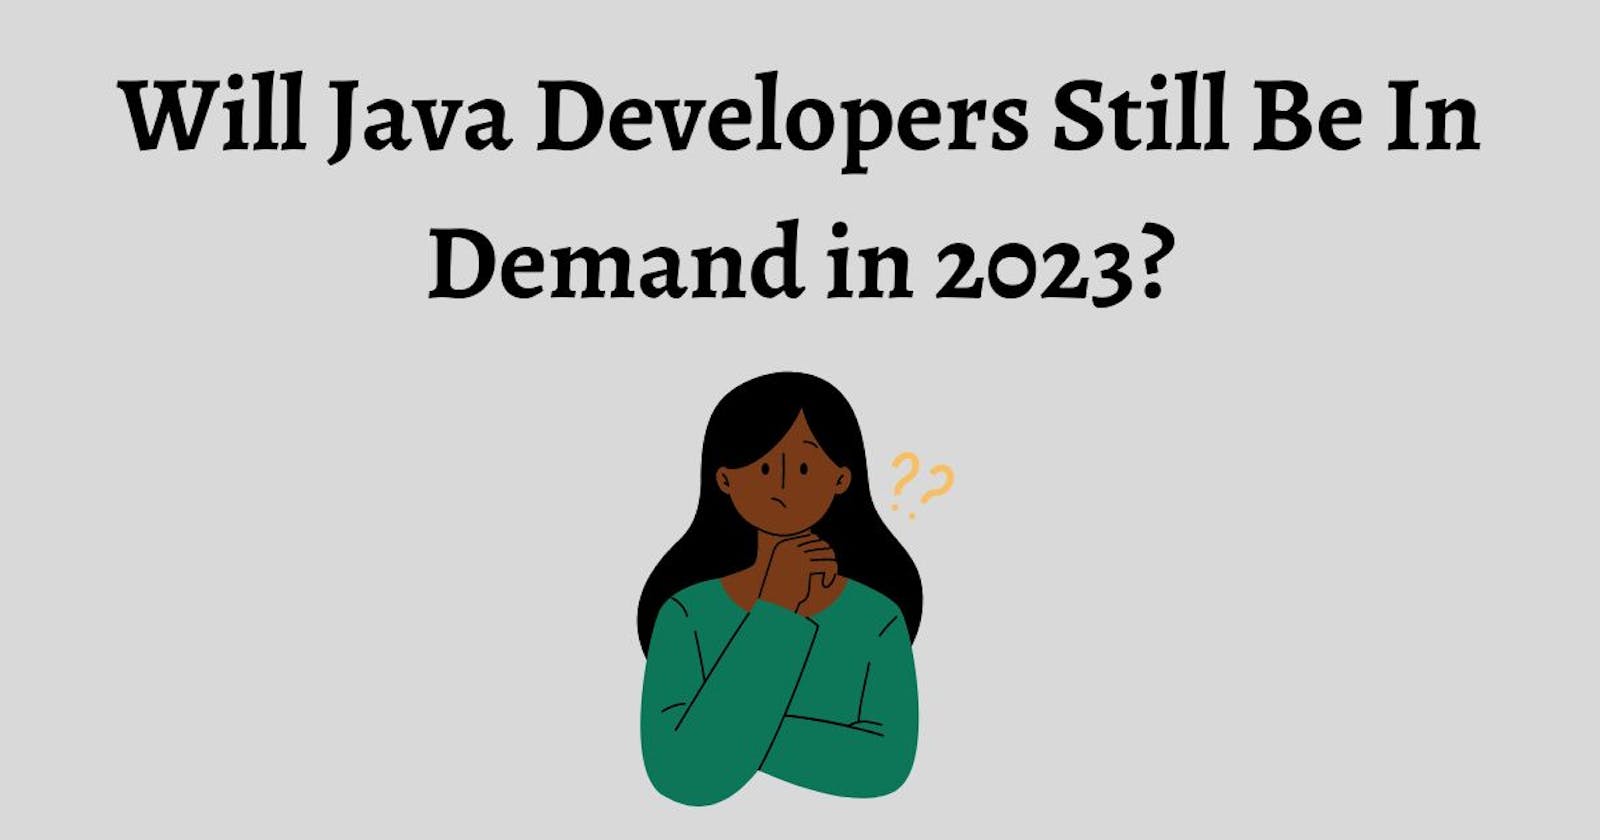 Will Java Developers Still Be In Demand in 2023?